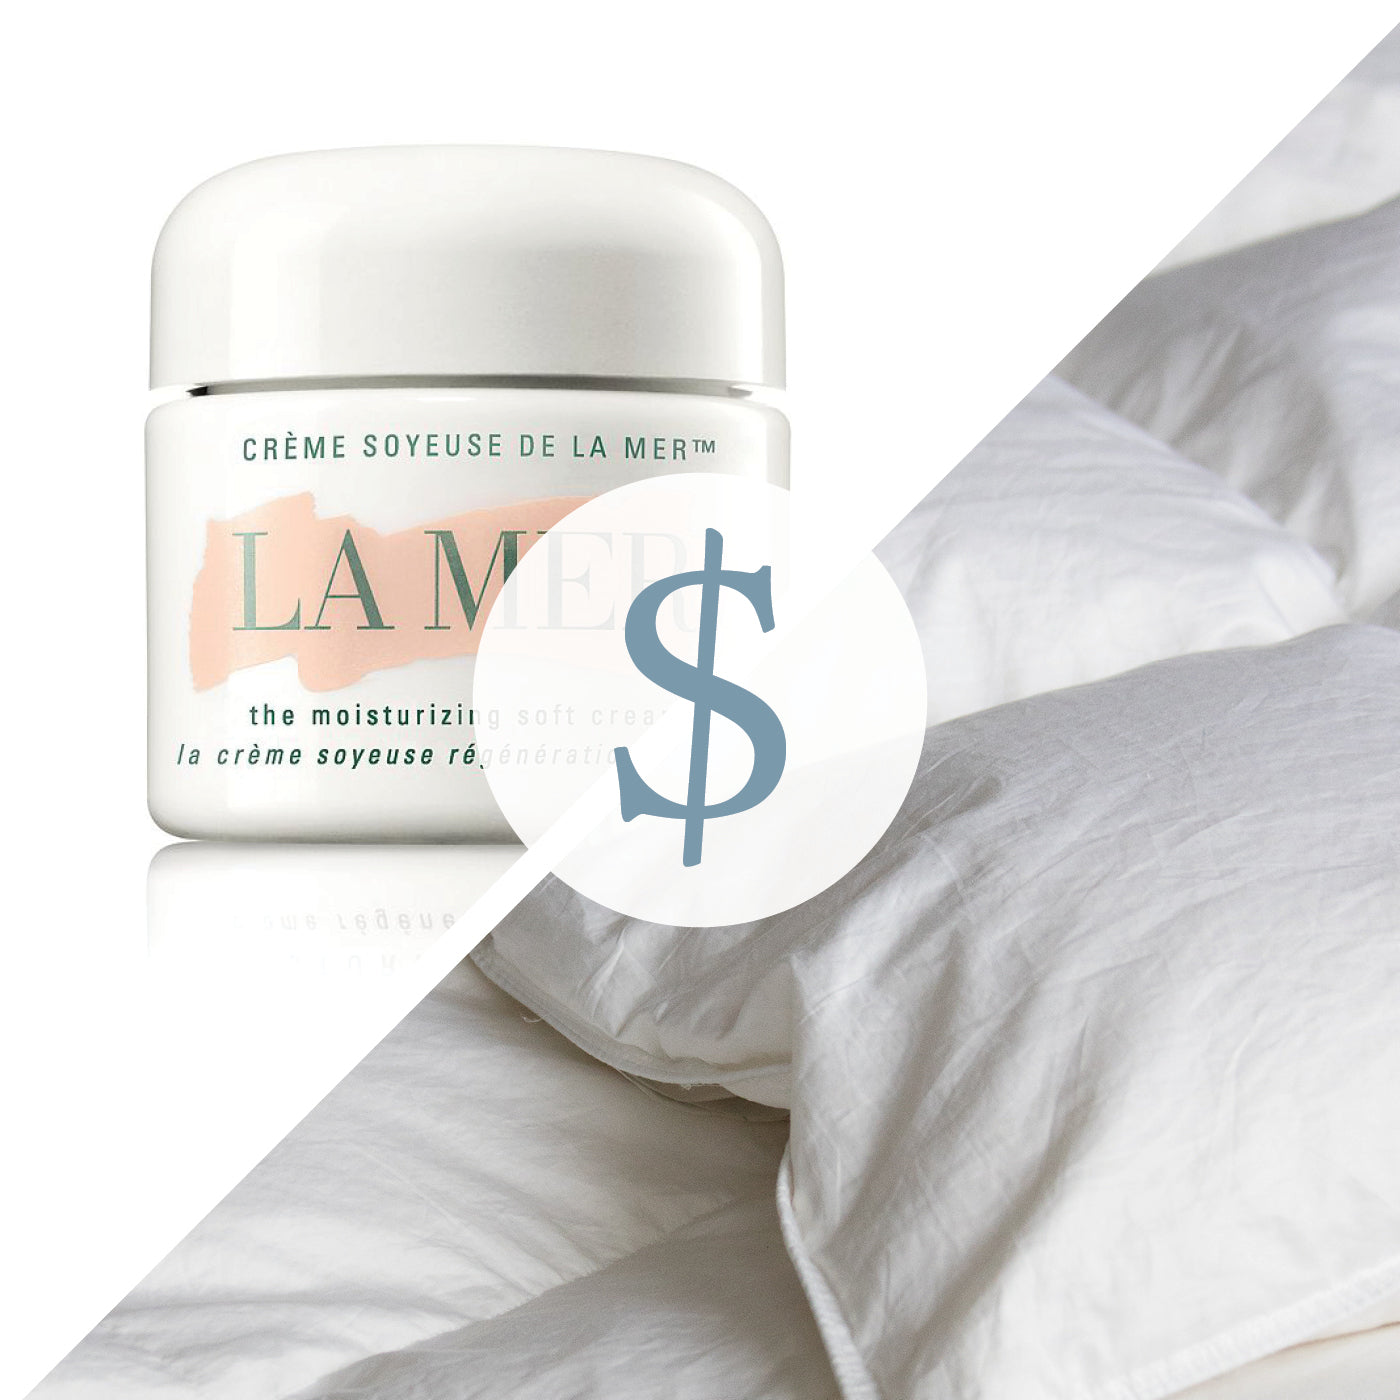 What Does a Good Sleep Cost?